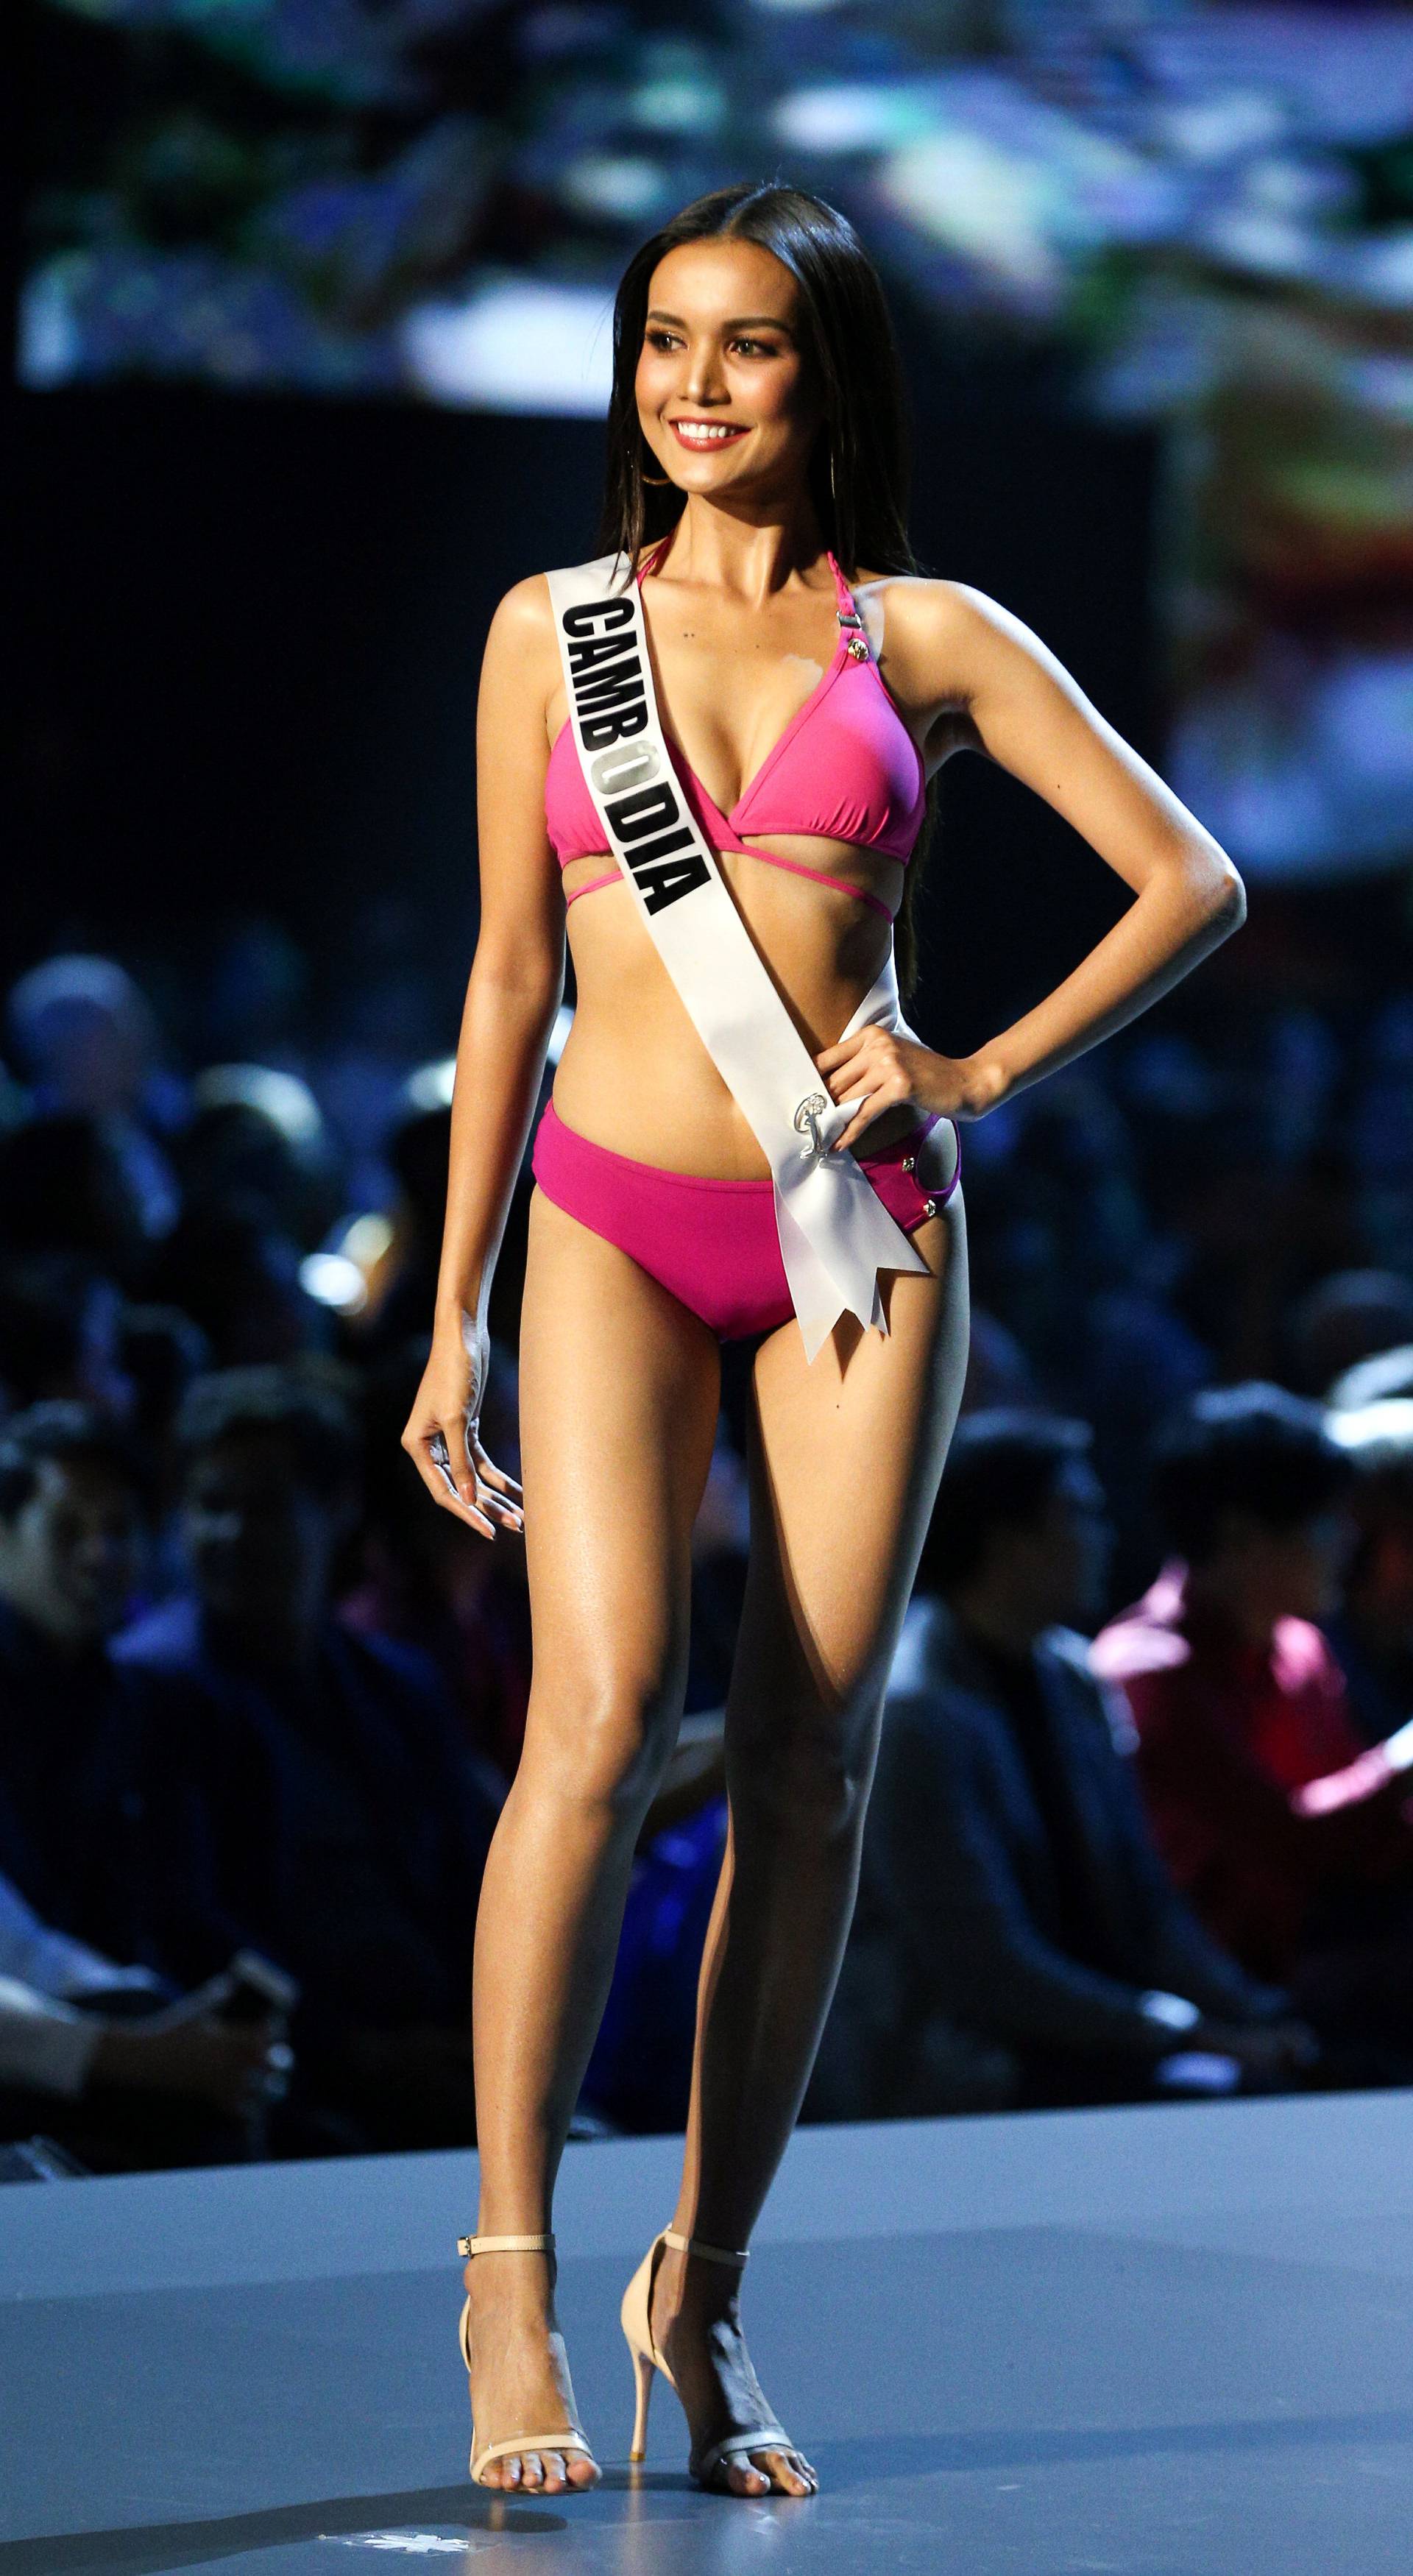 Miss Cambodia Nat Rern in her swimsuit during the Miss Universe 2018 preliminary round in Bangkok